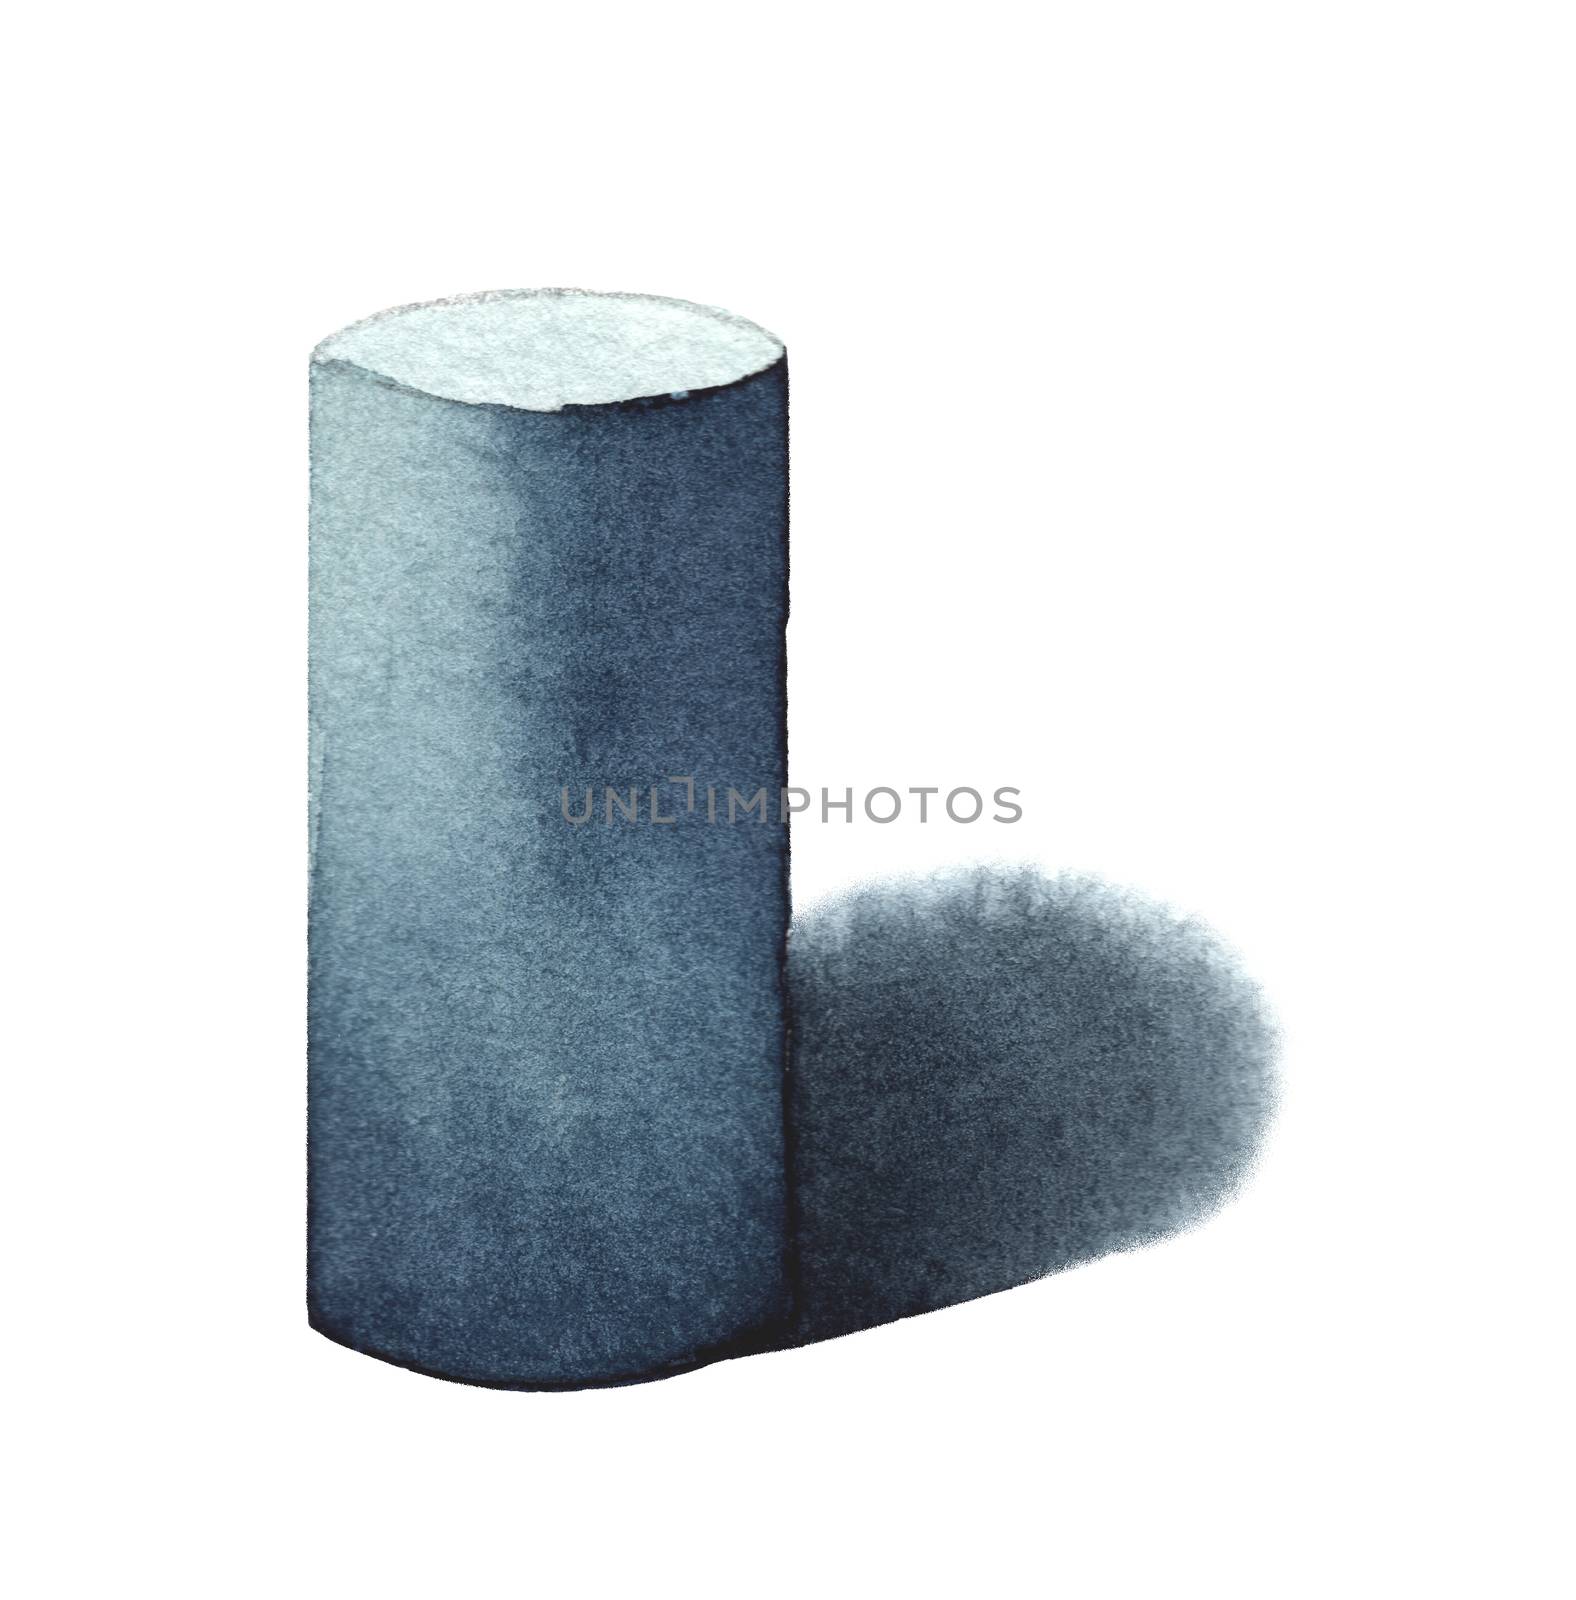 Cylindrical, basic geometric shapes with dramatic light and shadow in watercolor style. Solids isolated on a white background. Clipping path. by Ungamrung